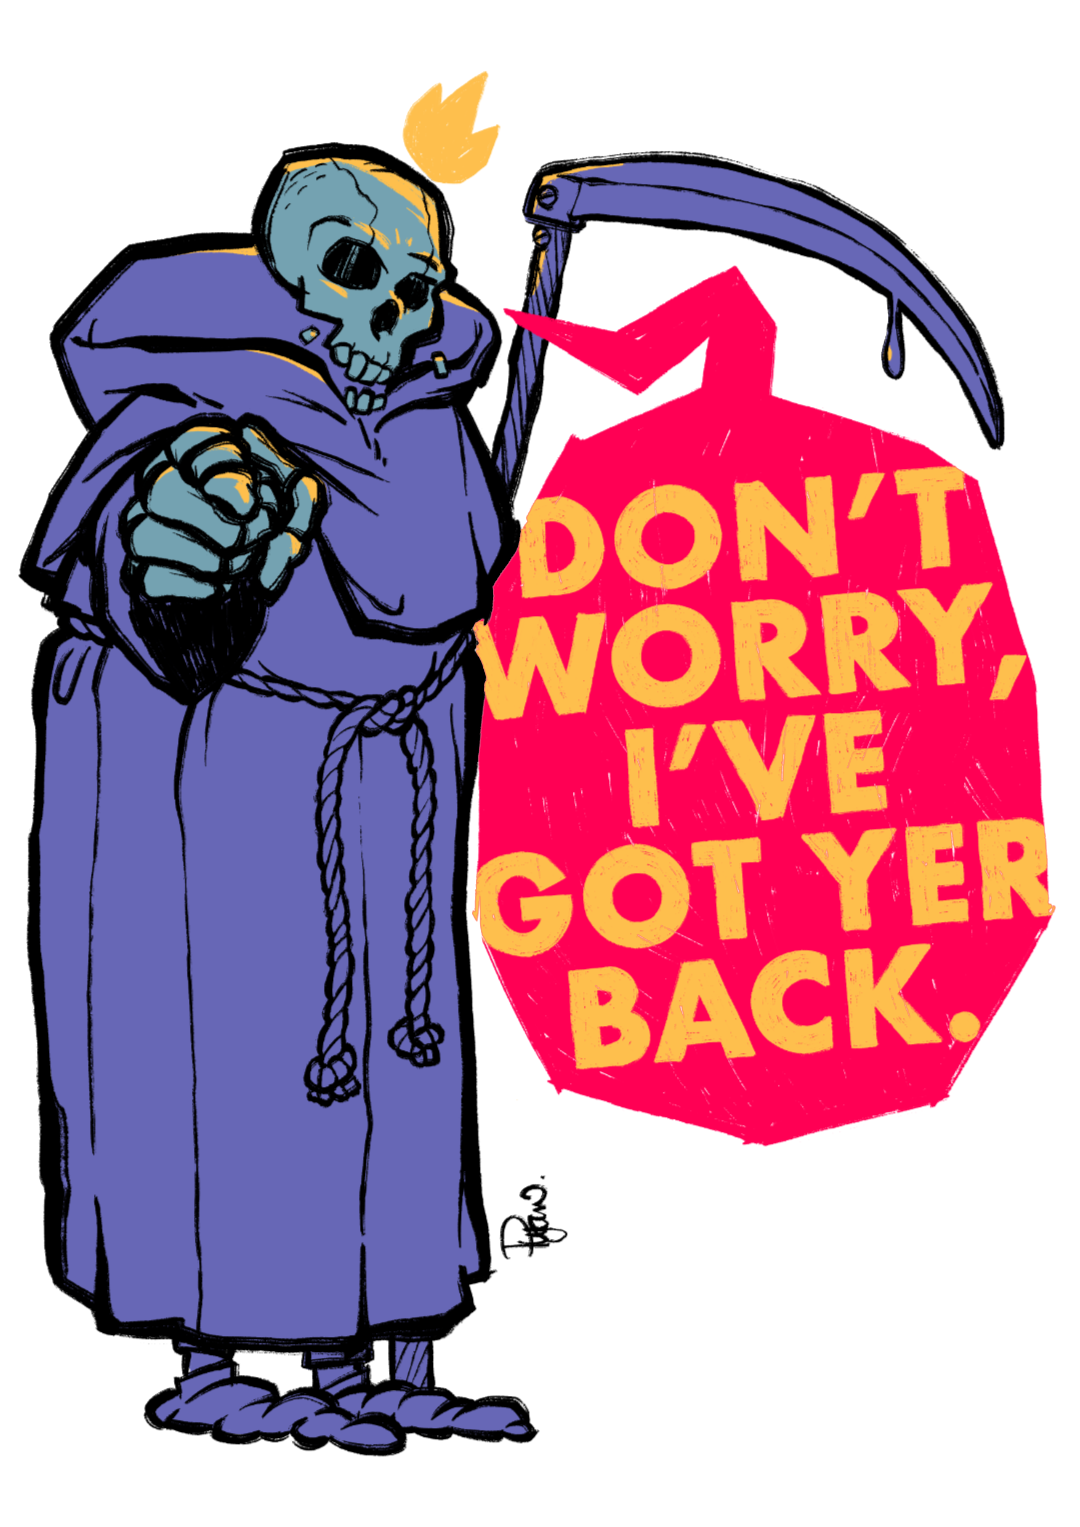 The Grim Reaper pointing at you saying don't worry, I've got yer back.